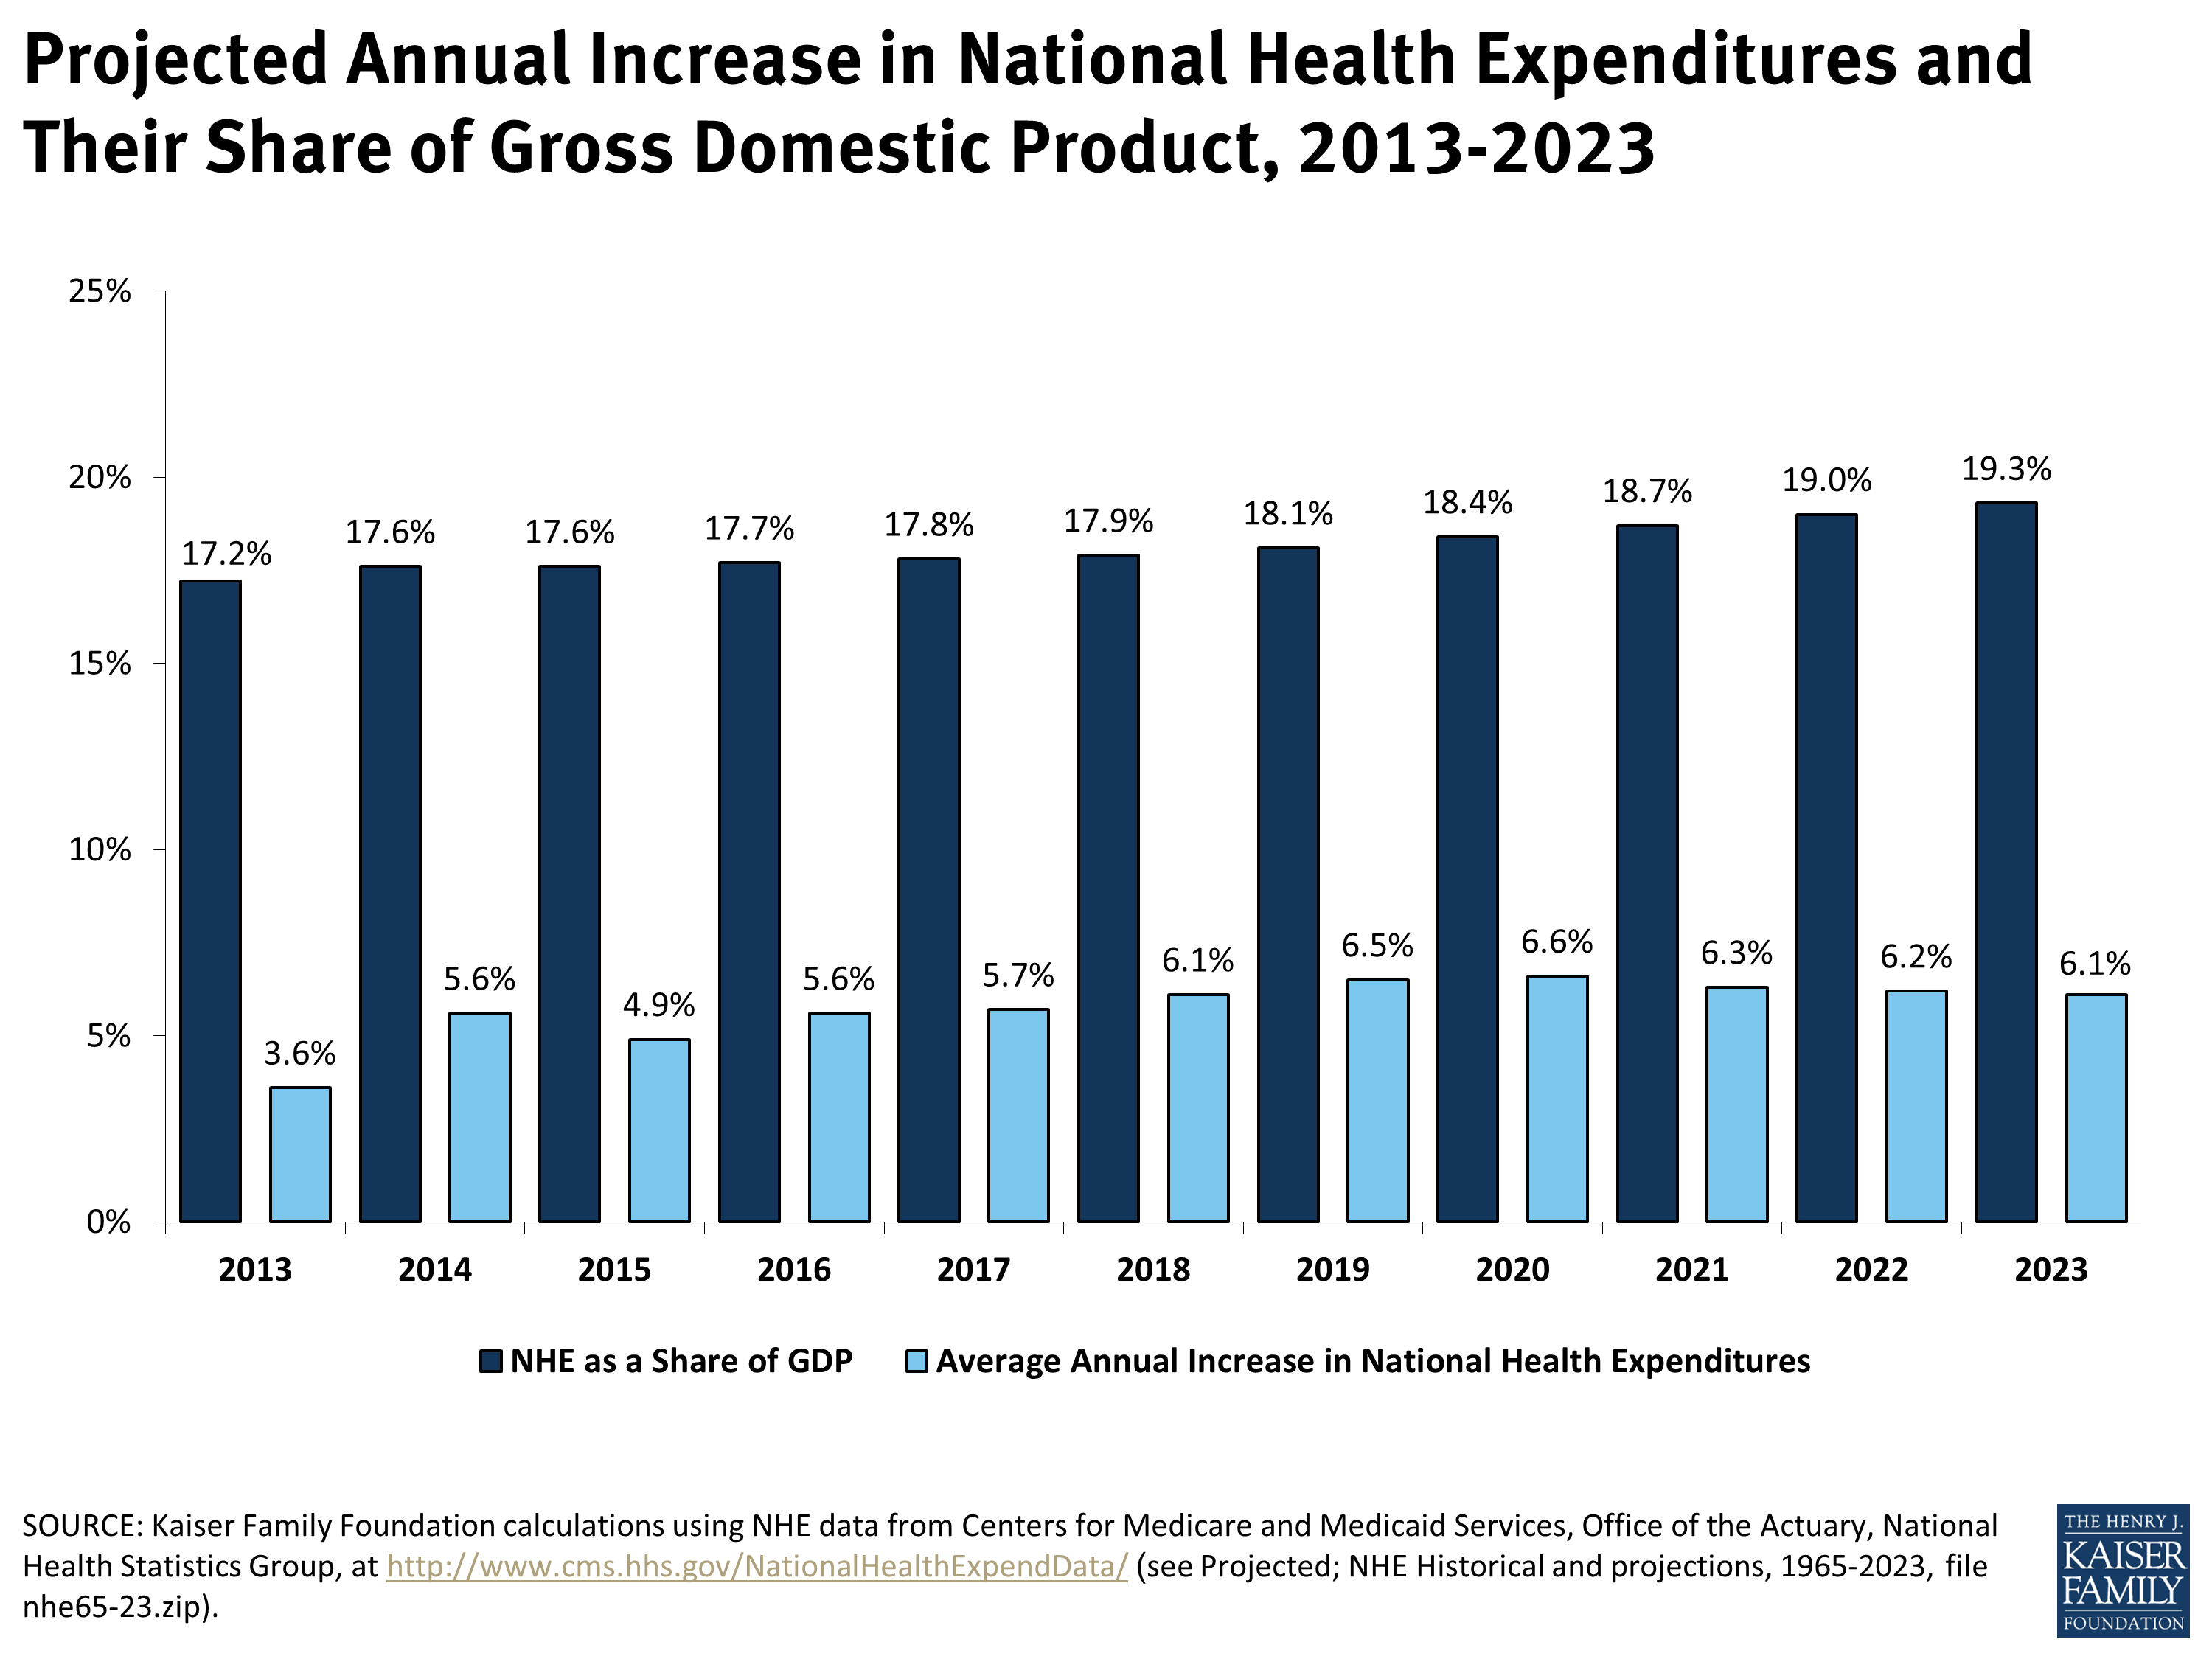 Projected Annual Increase in National Health Expenditures and Their